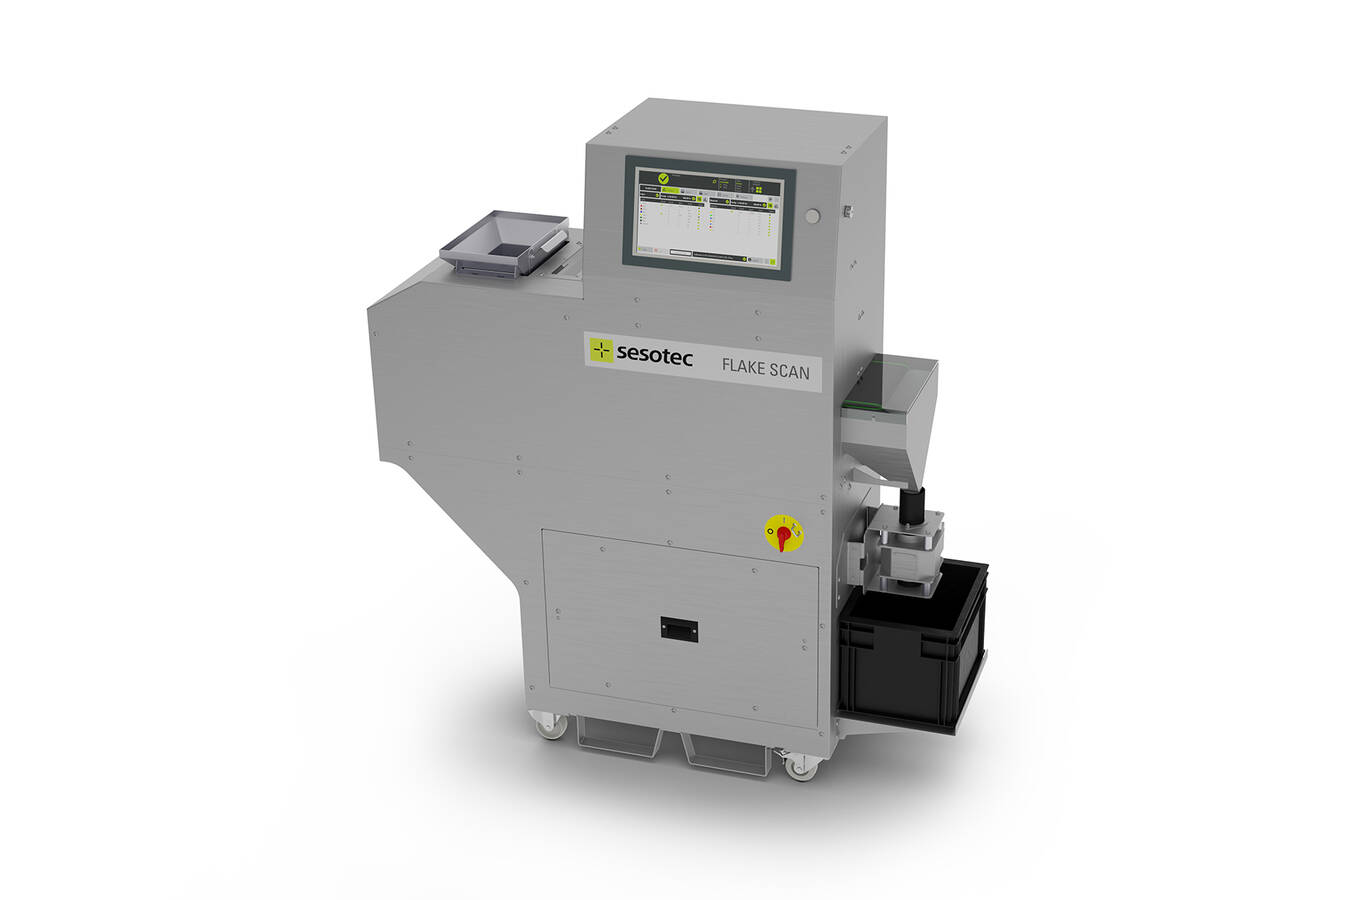 A finalist in the Plastics Recycling Awards Europe: Use FLAKE SCAN by Sesotec to quickly and confidently assess the quality of plastic flakes and regrind. (Photo: Sesotec GmbH)